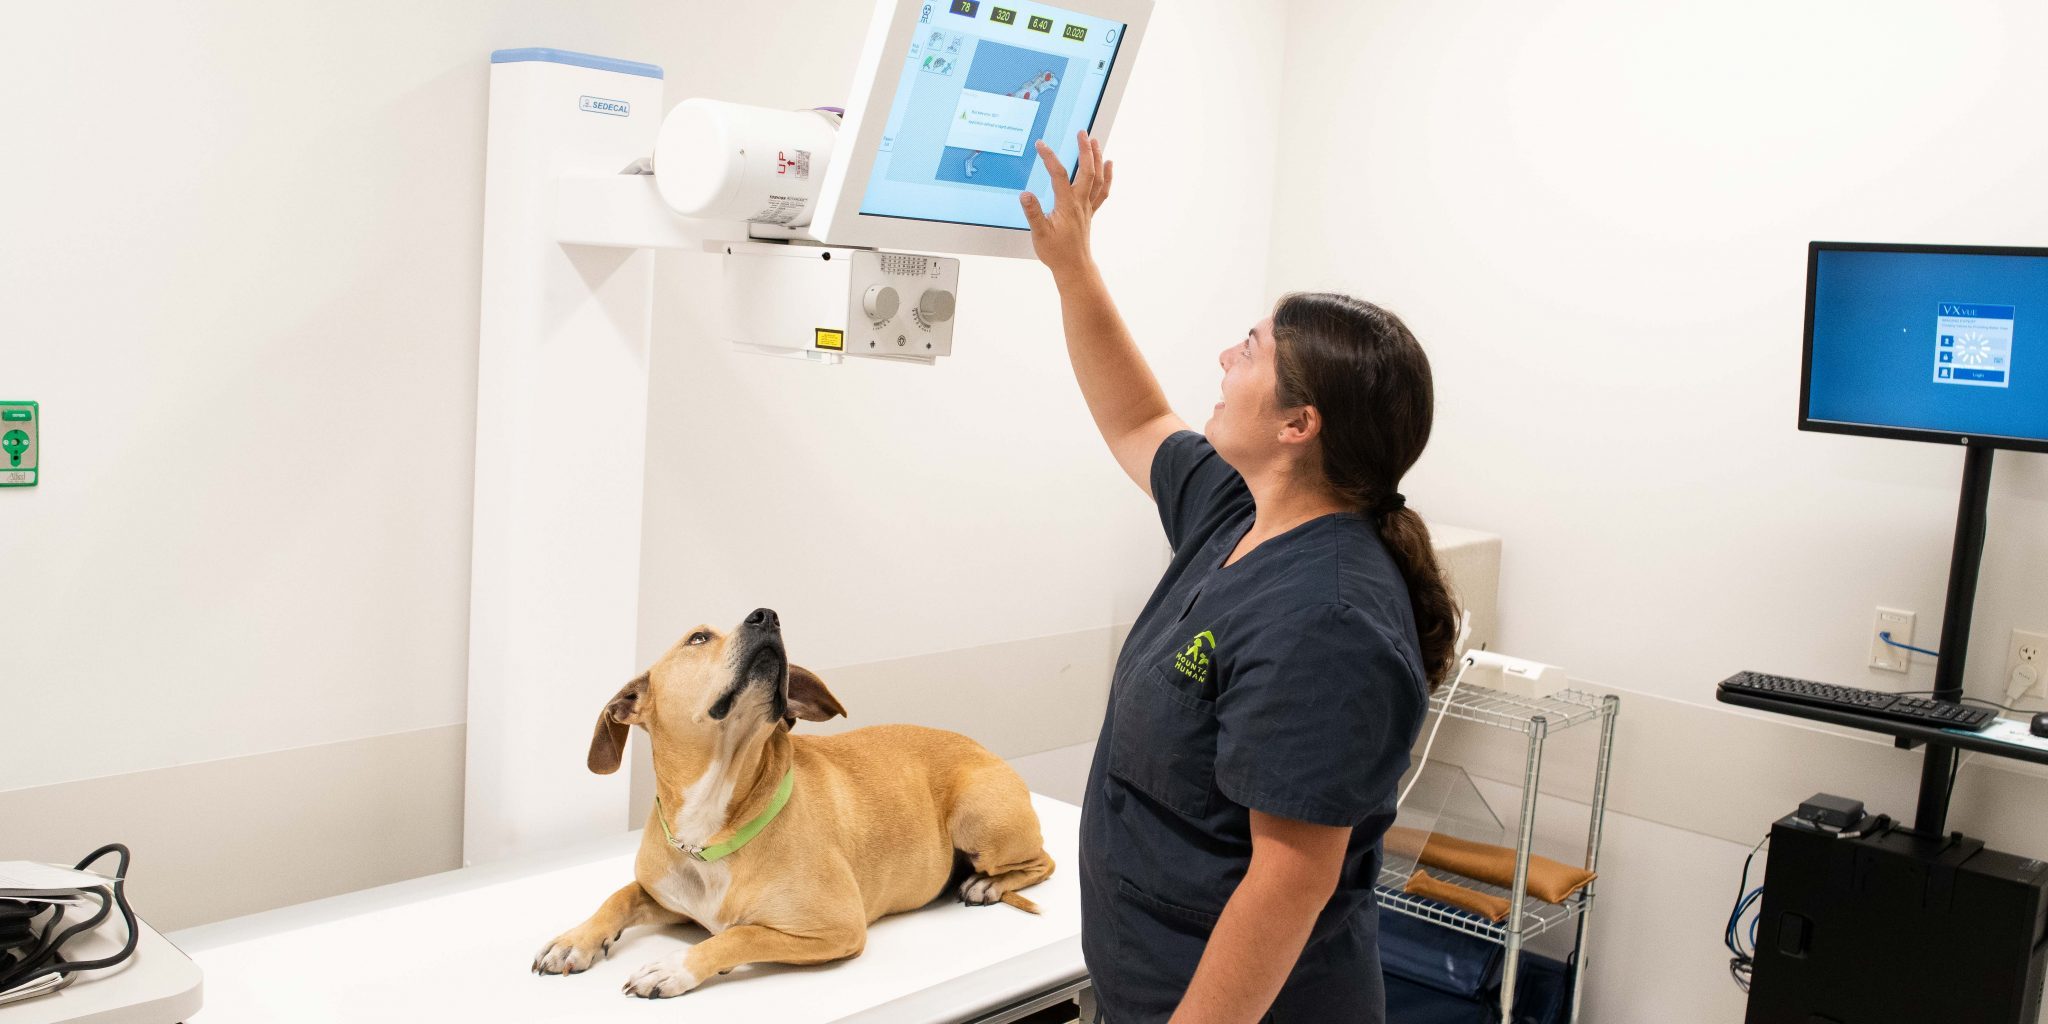 Woman interacting with a monitor above a dog laying on a radiology table